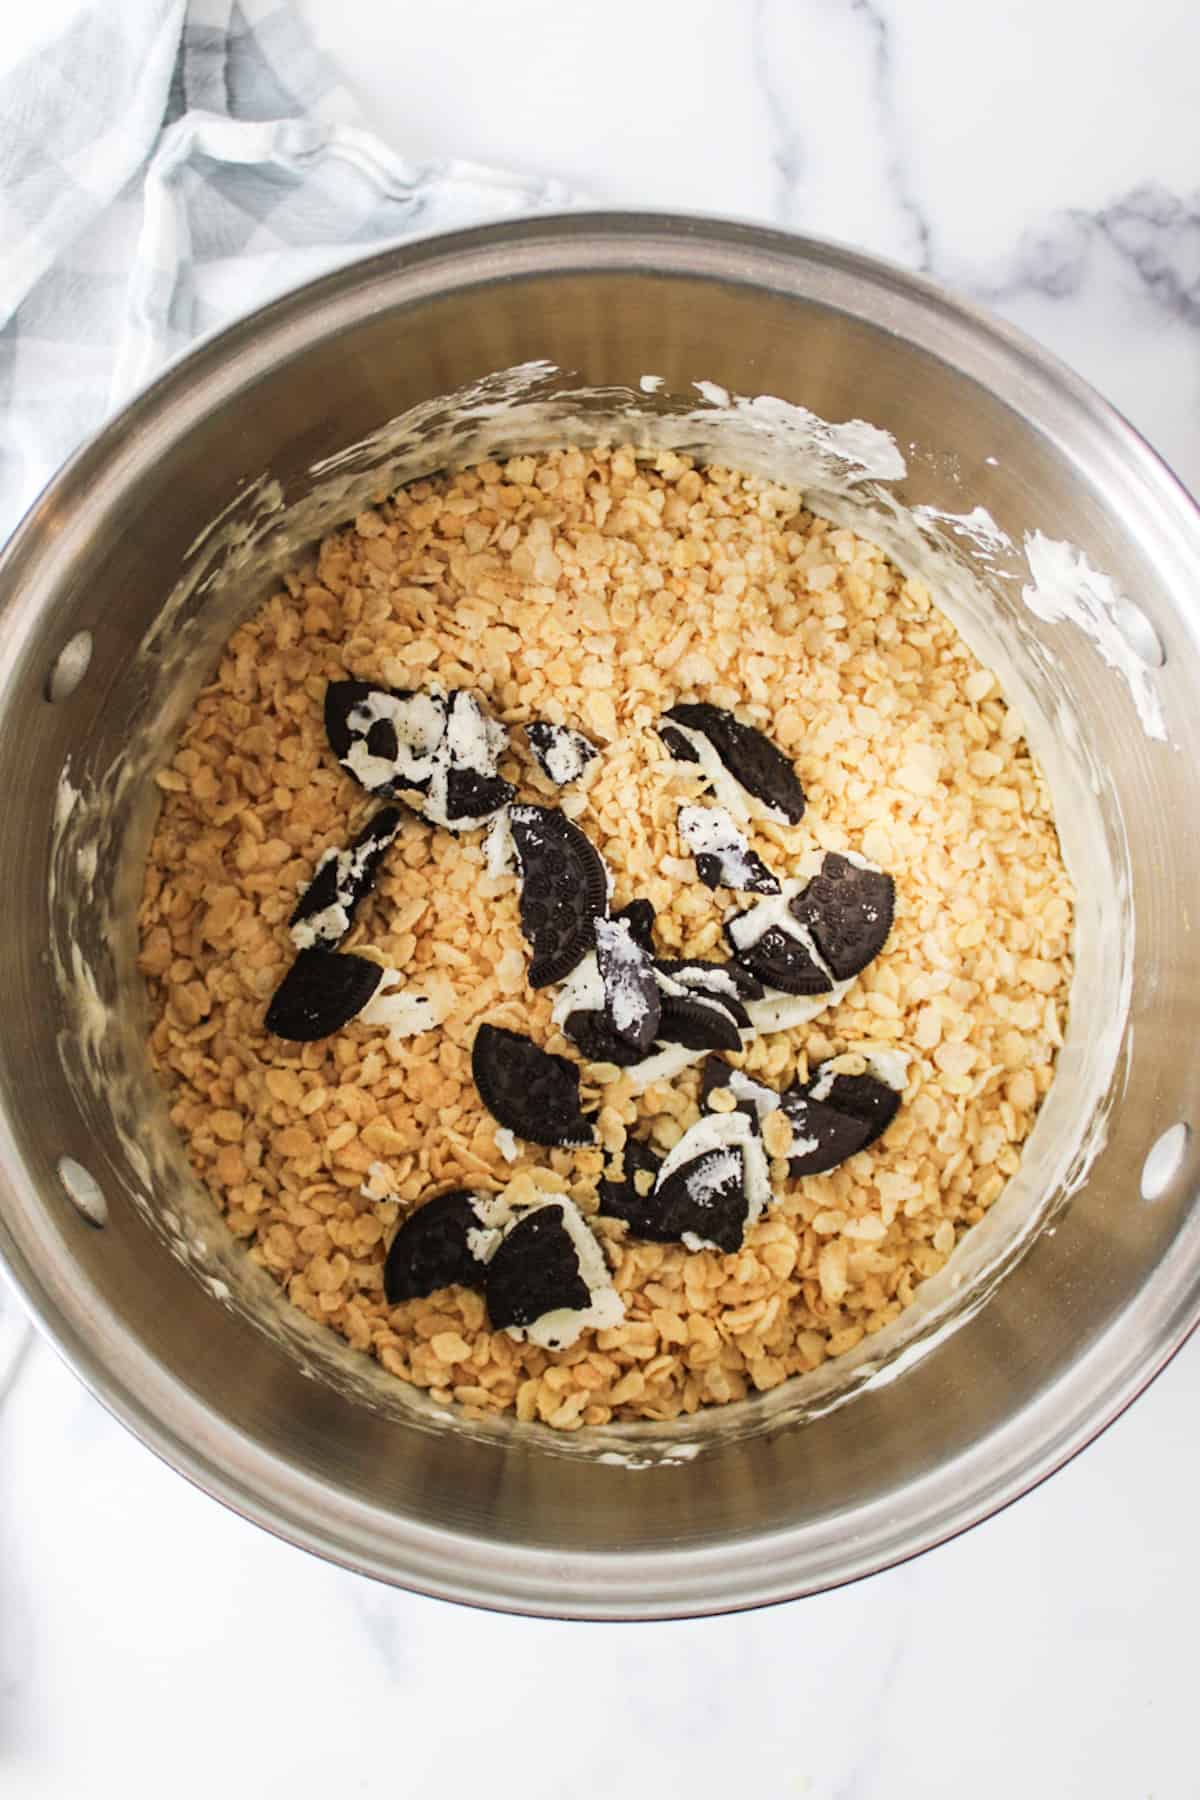 rice krispy cereal and broken oreos added to a pot of melted marshmallows.